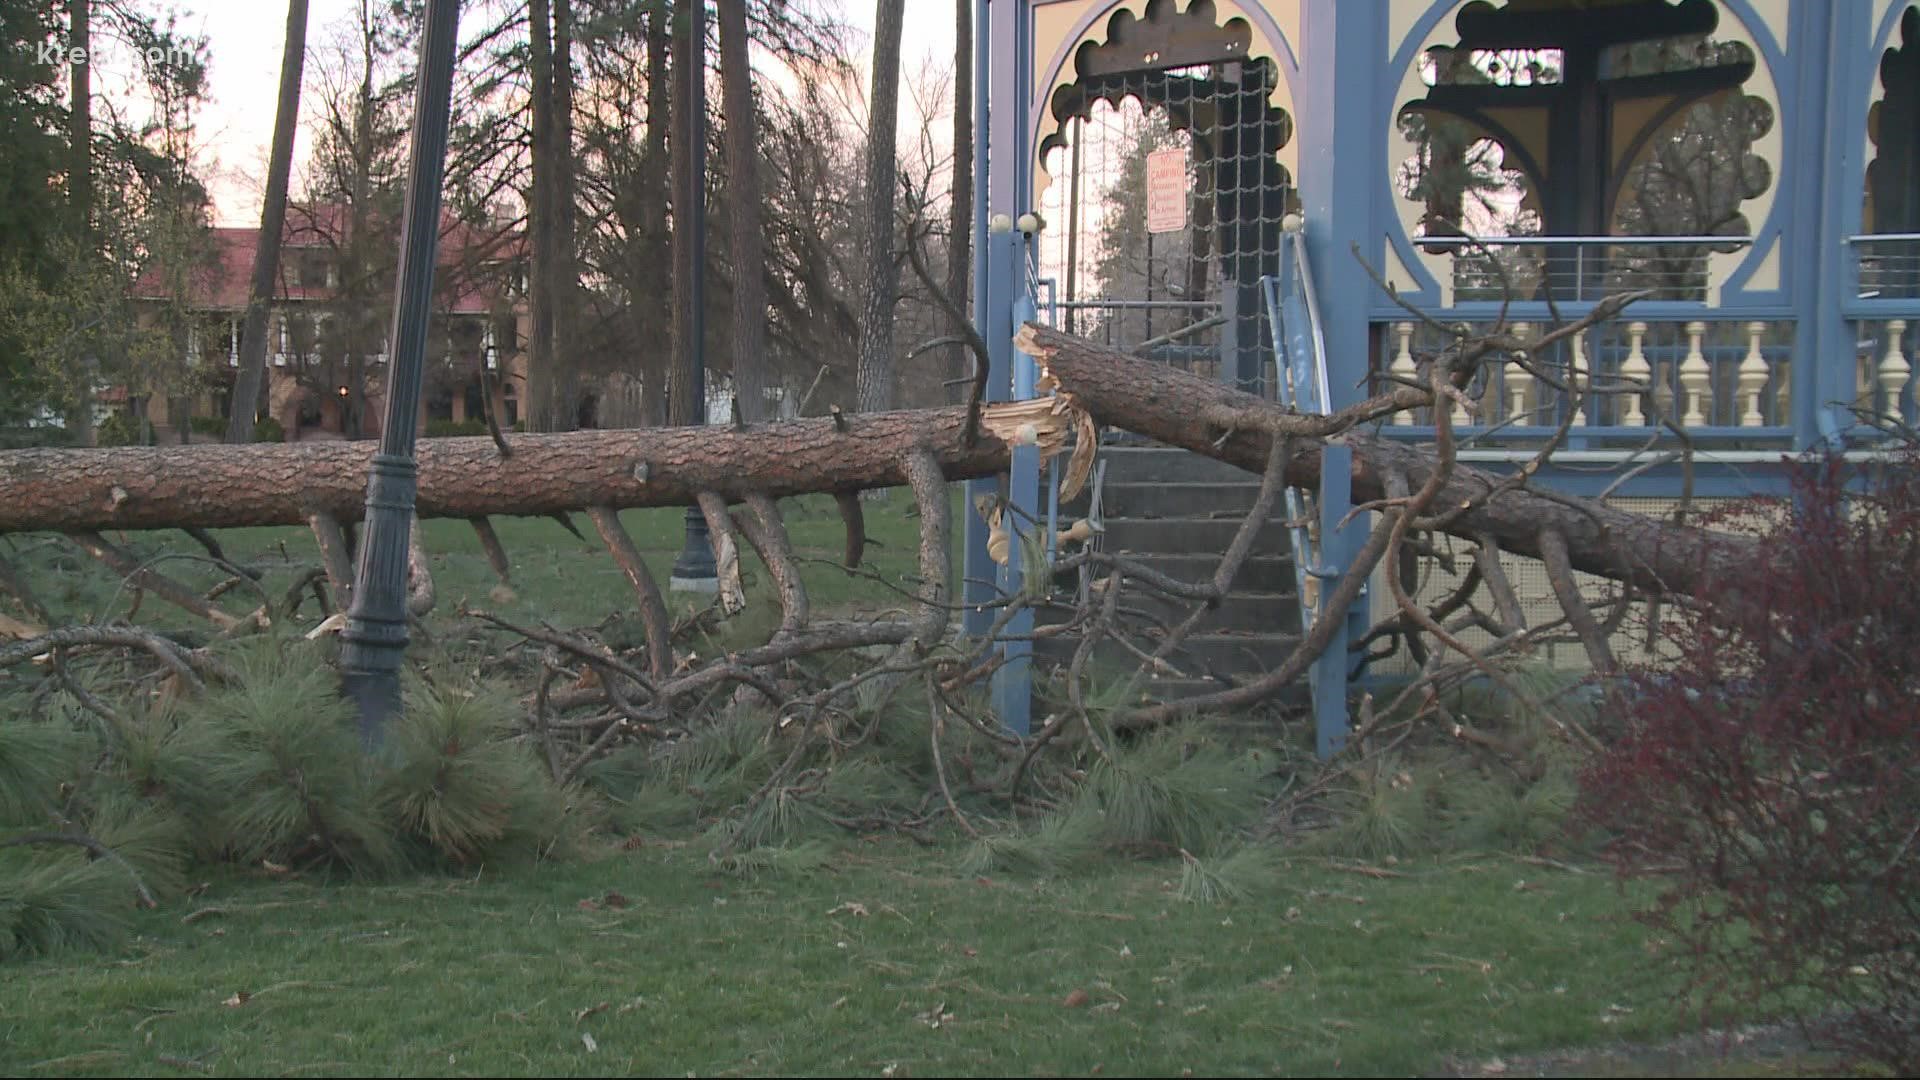 The windstorm that ripped through the Inland Northwest took its toll on Spokane's city parks.